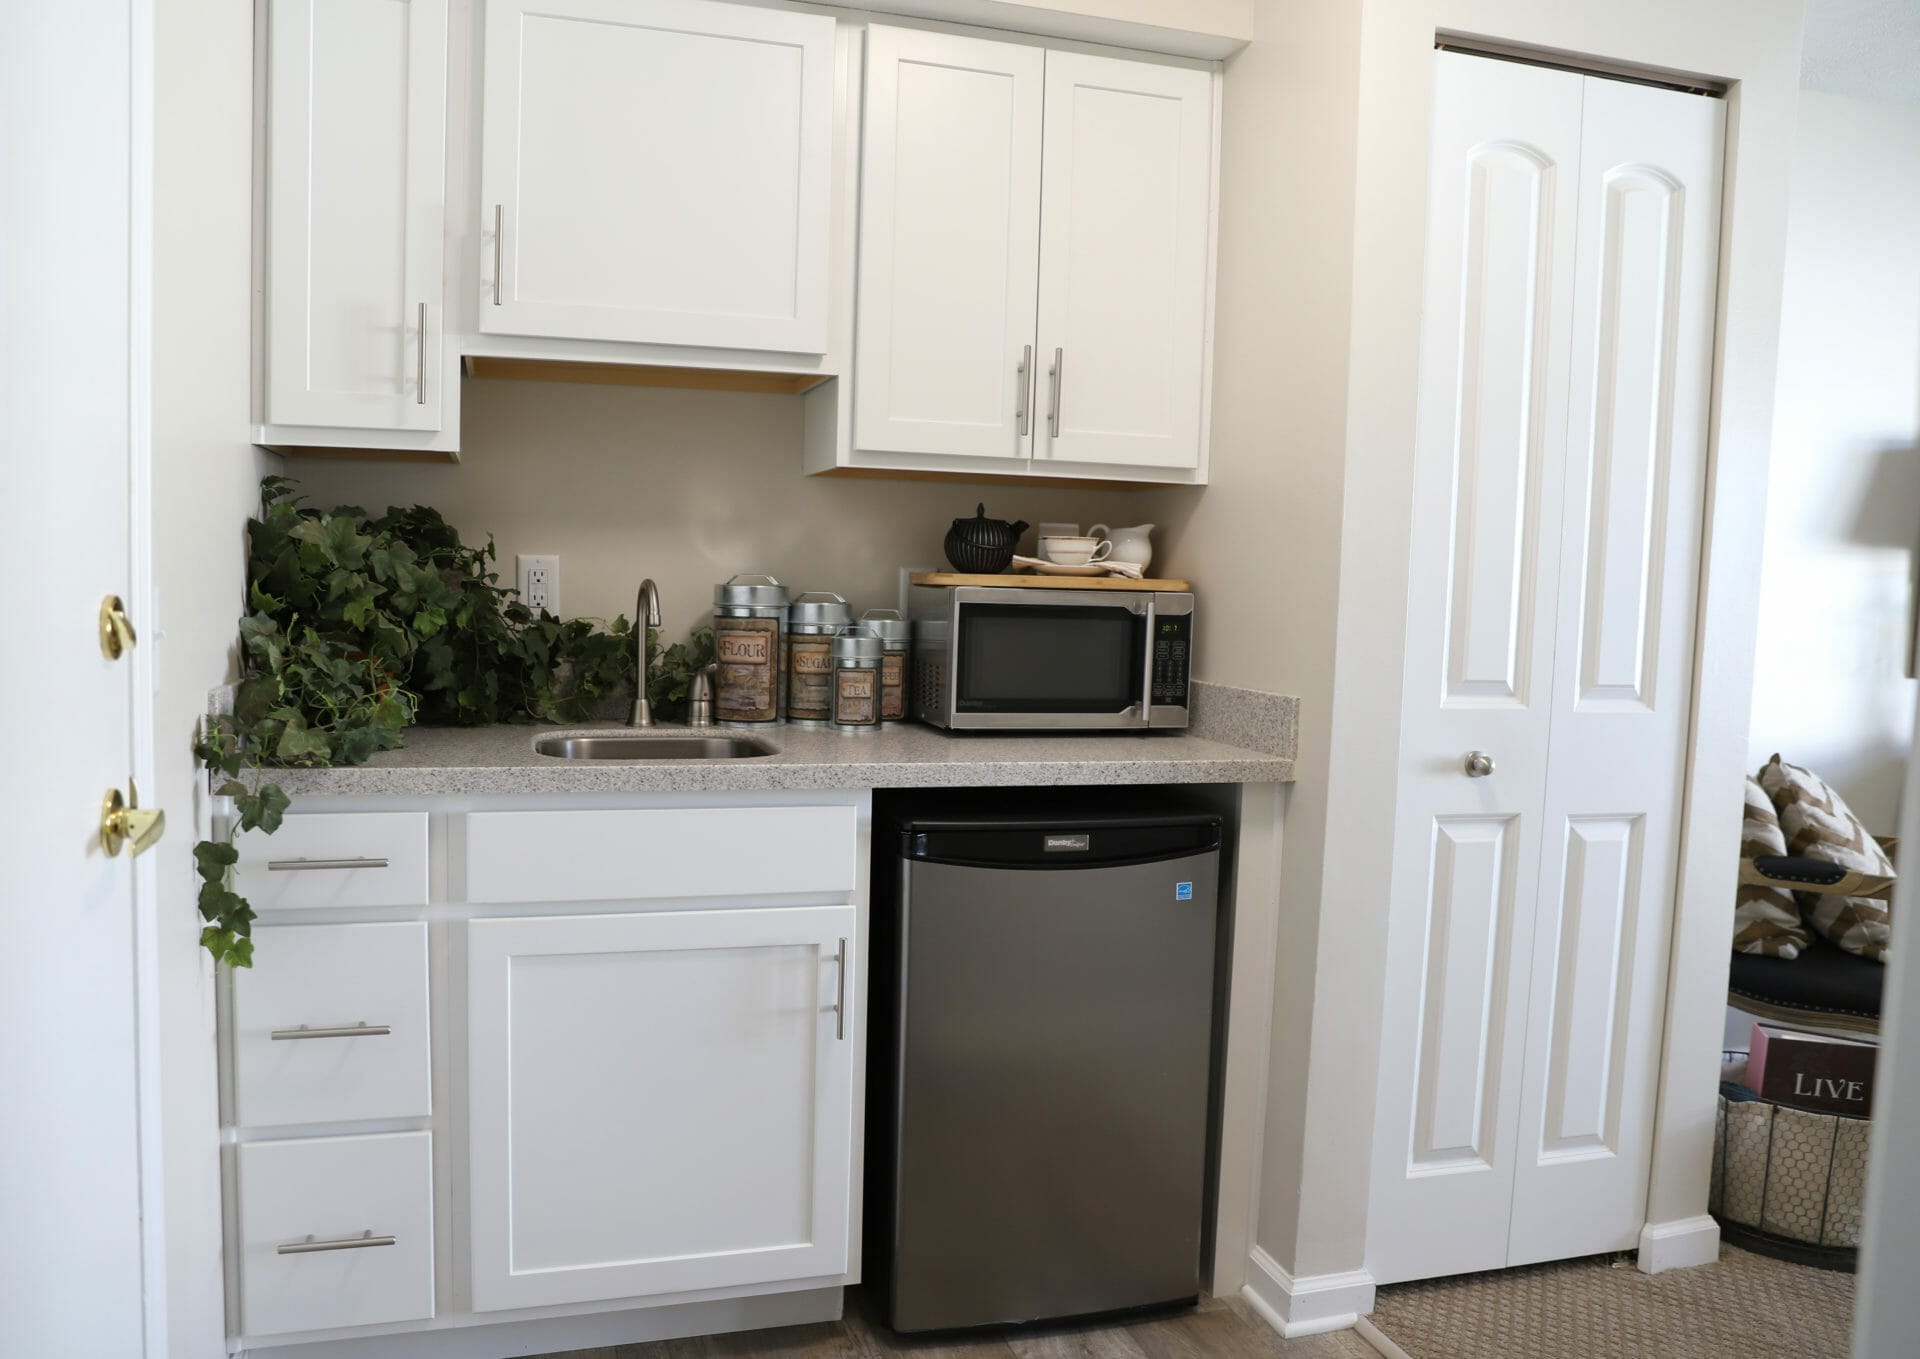 <span  class="uc_style_uc_tiles_grid_image_elementor_uc_items_attribute_title" style="color:#000000;">A kitchenette with a compact dishwasher, sink, and microwave. </span>